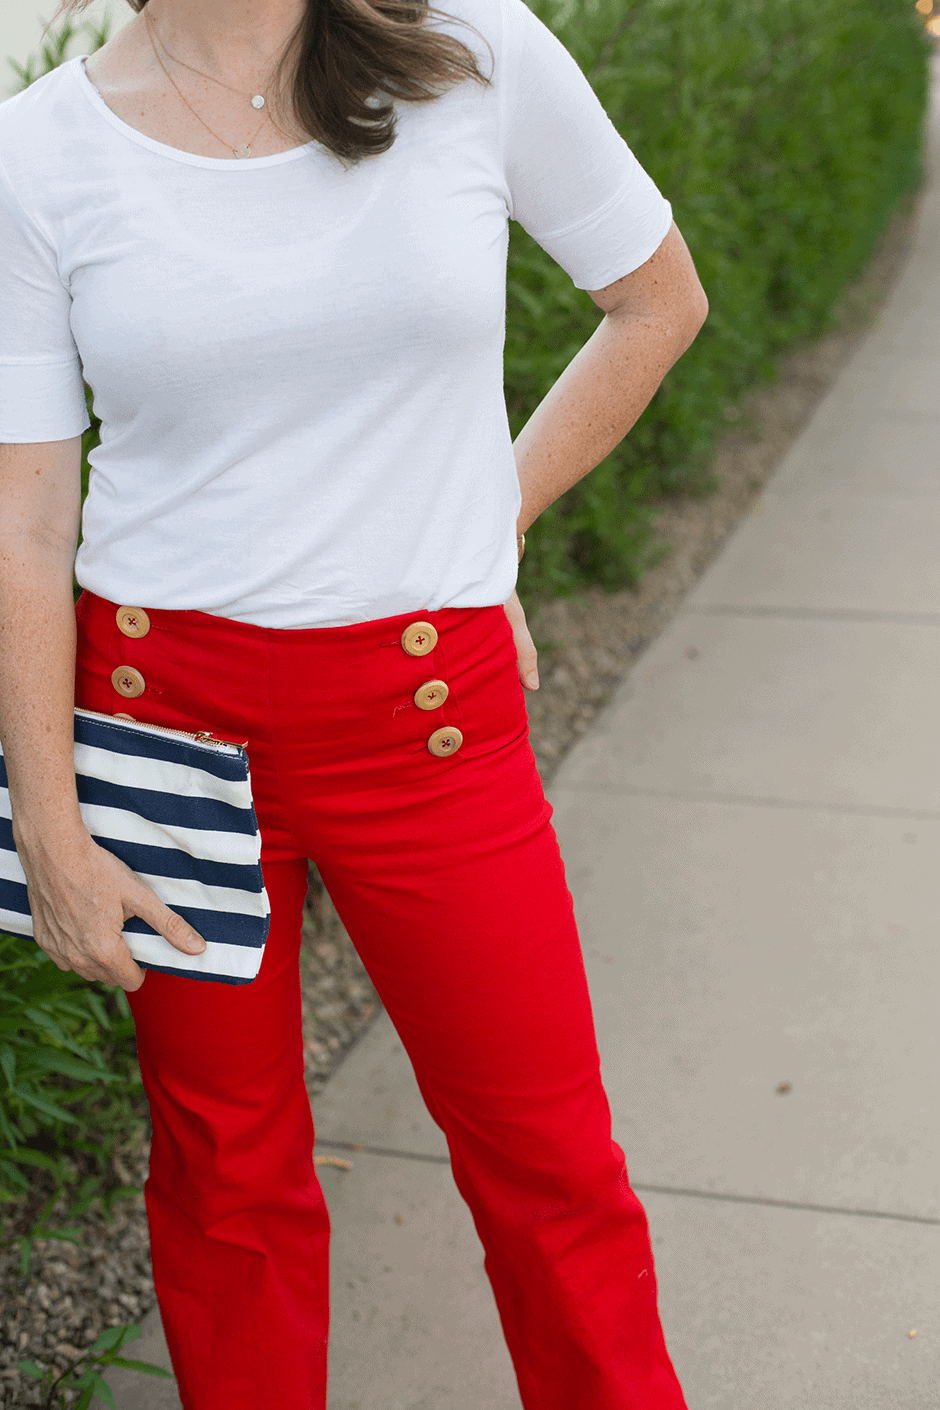 DIY Trousers to Riding Pants - Live Free Creative Co